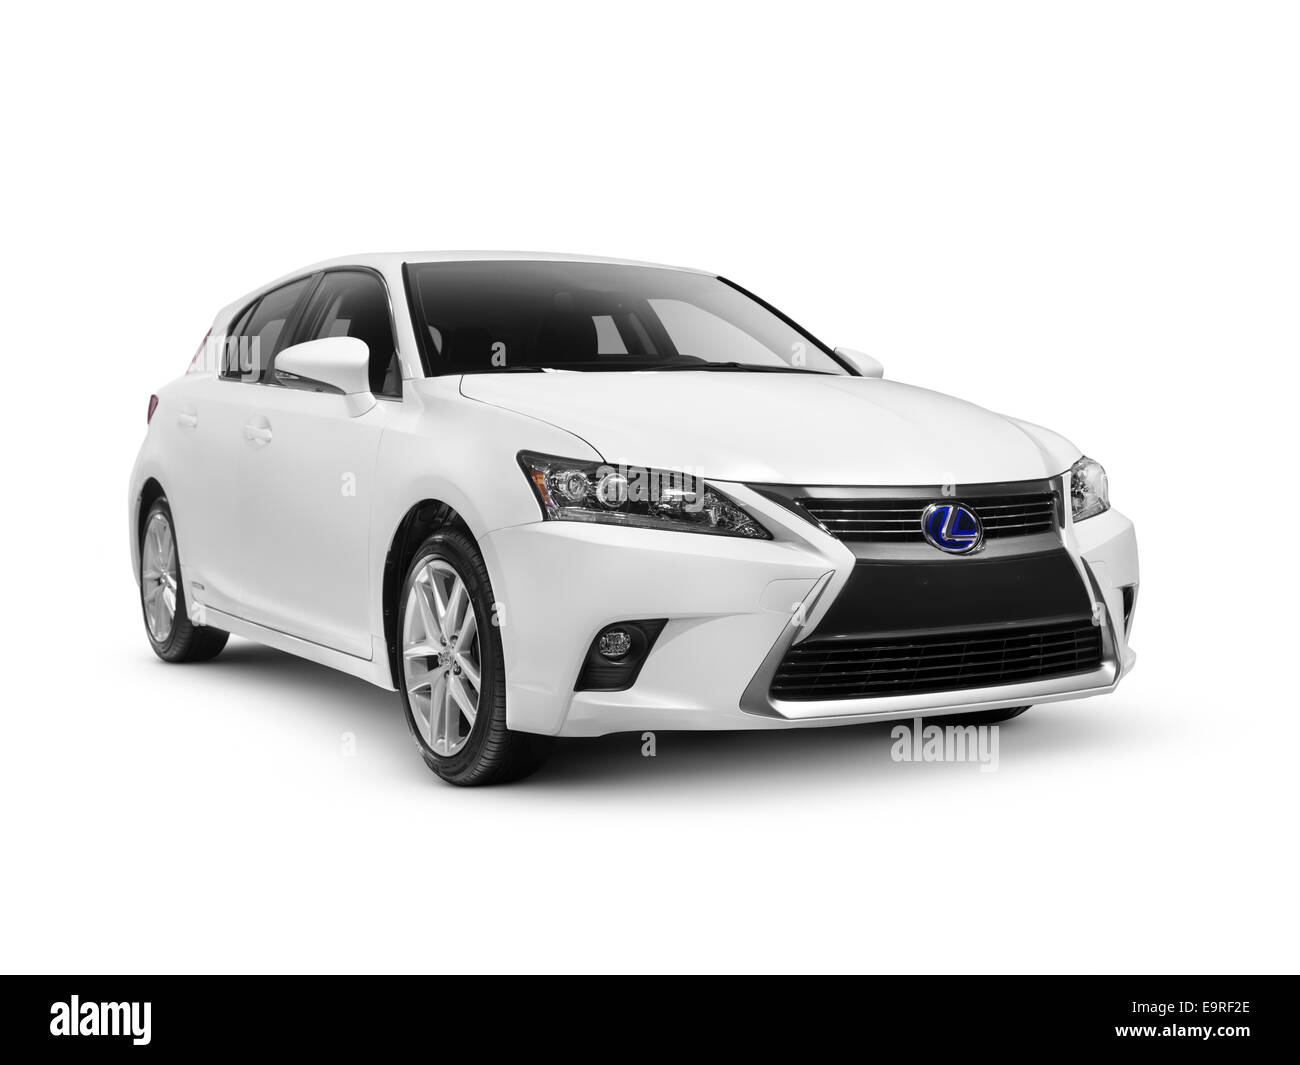 License available at MaximImages.com - White 2014 Lexus CT 200h compact luxury hybrid hatchback car isolated on white background with clipping path Stock Photo